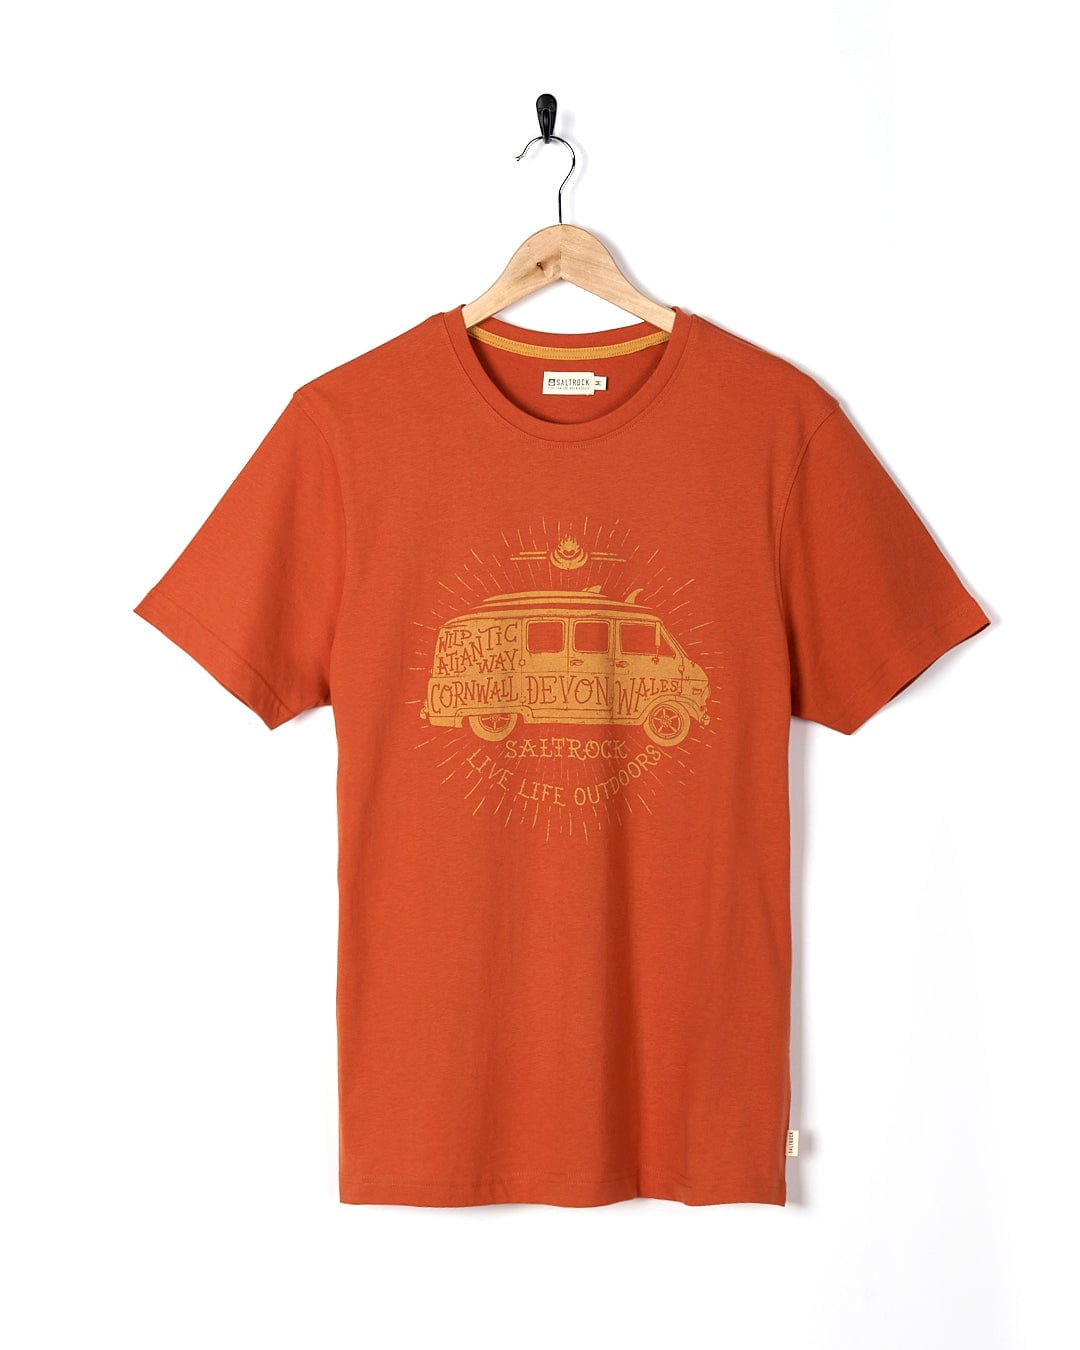 A Live Life Location - Mens Short Sleeve T-Shirt in Orange by Saltrock, with an image of a van.